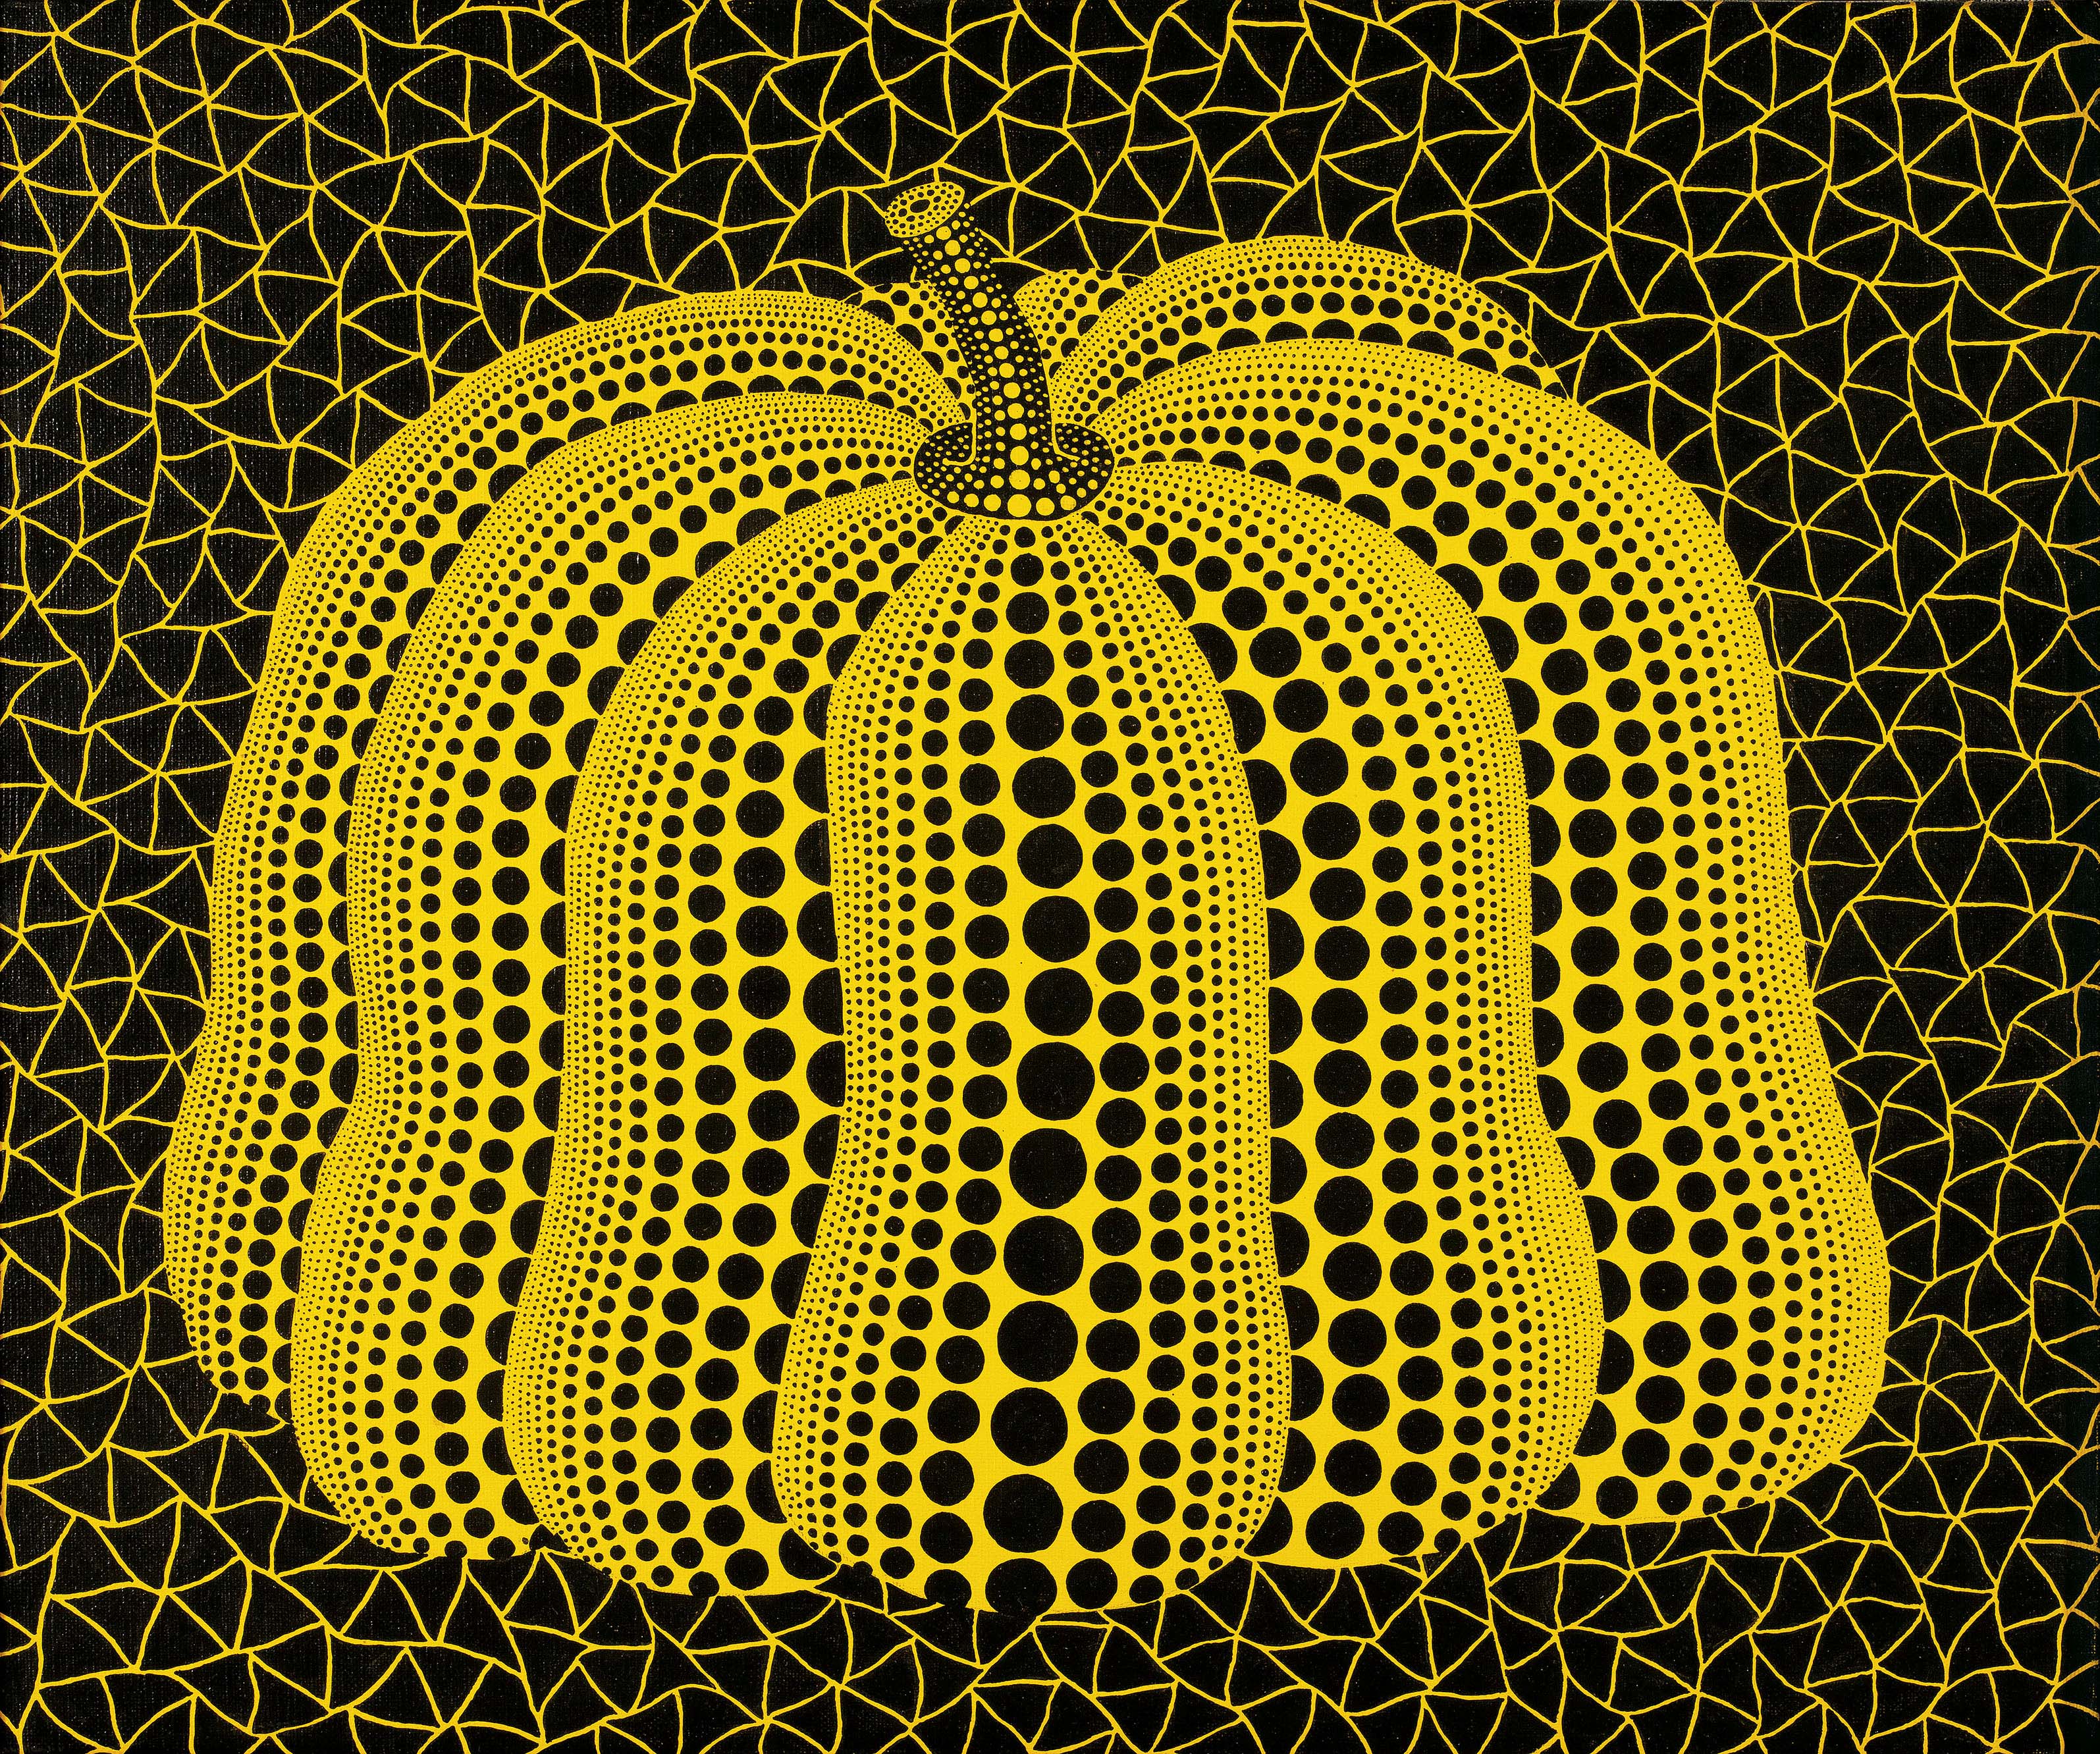 Why Is Yayoi Kusama Obsessed With Pumpkins